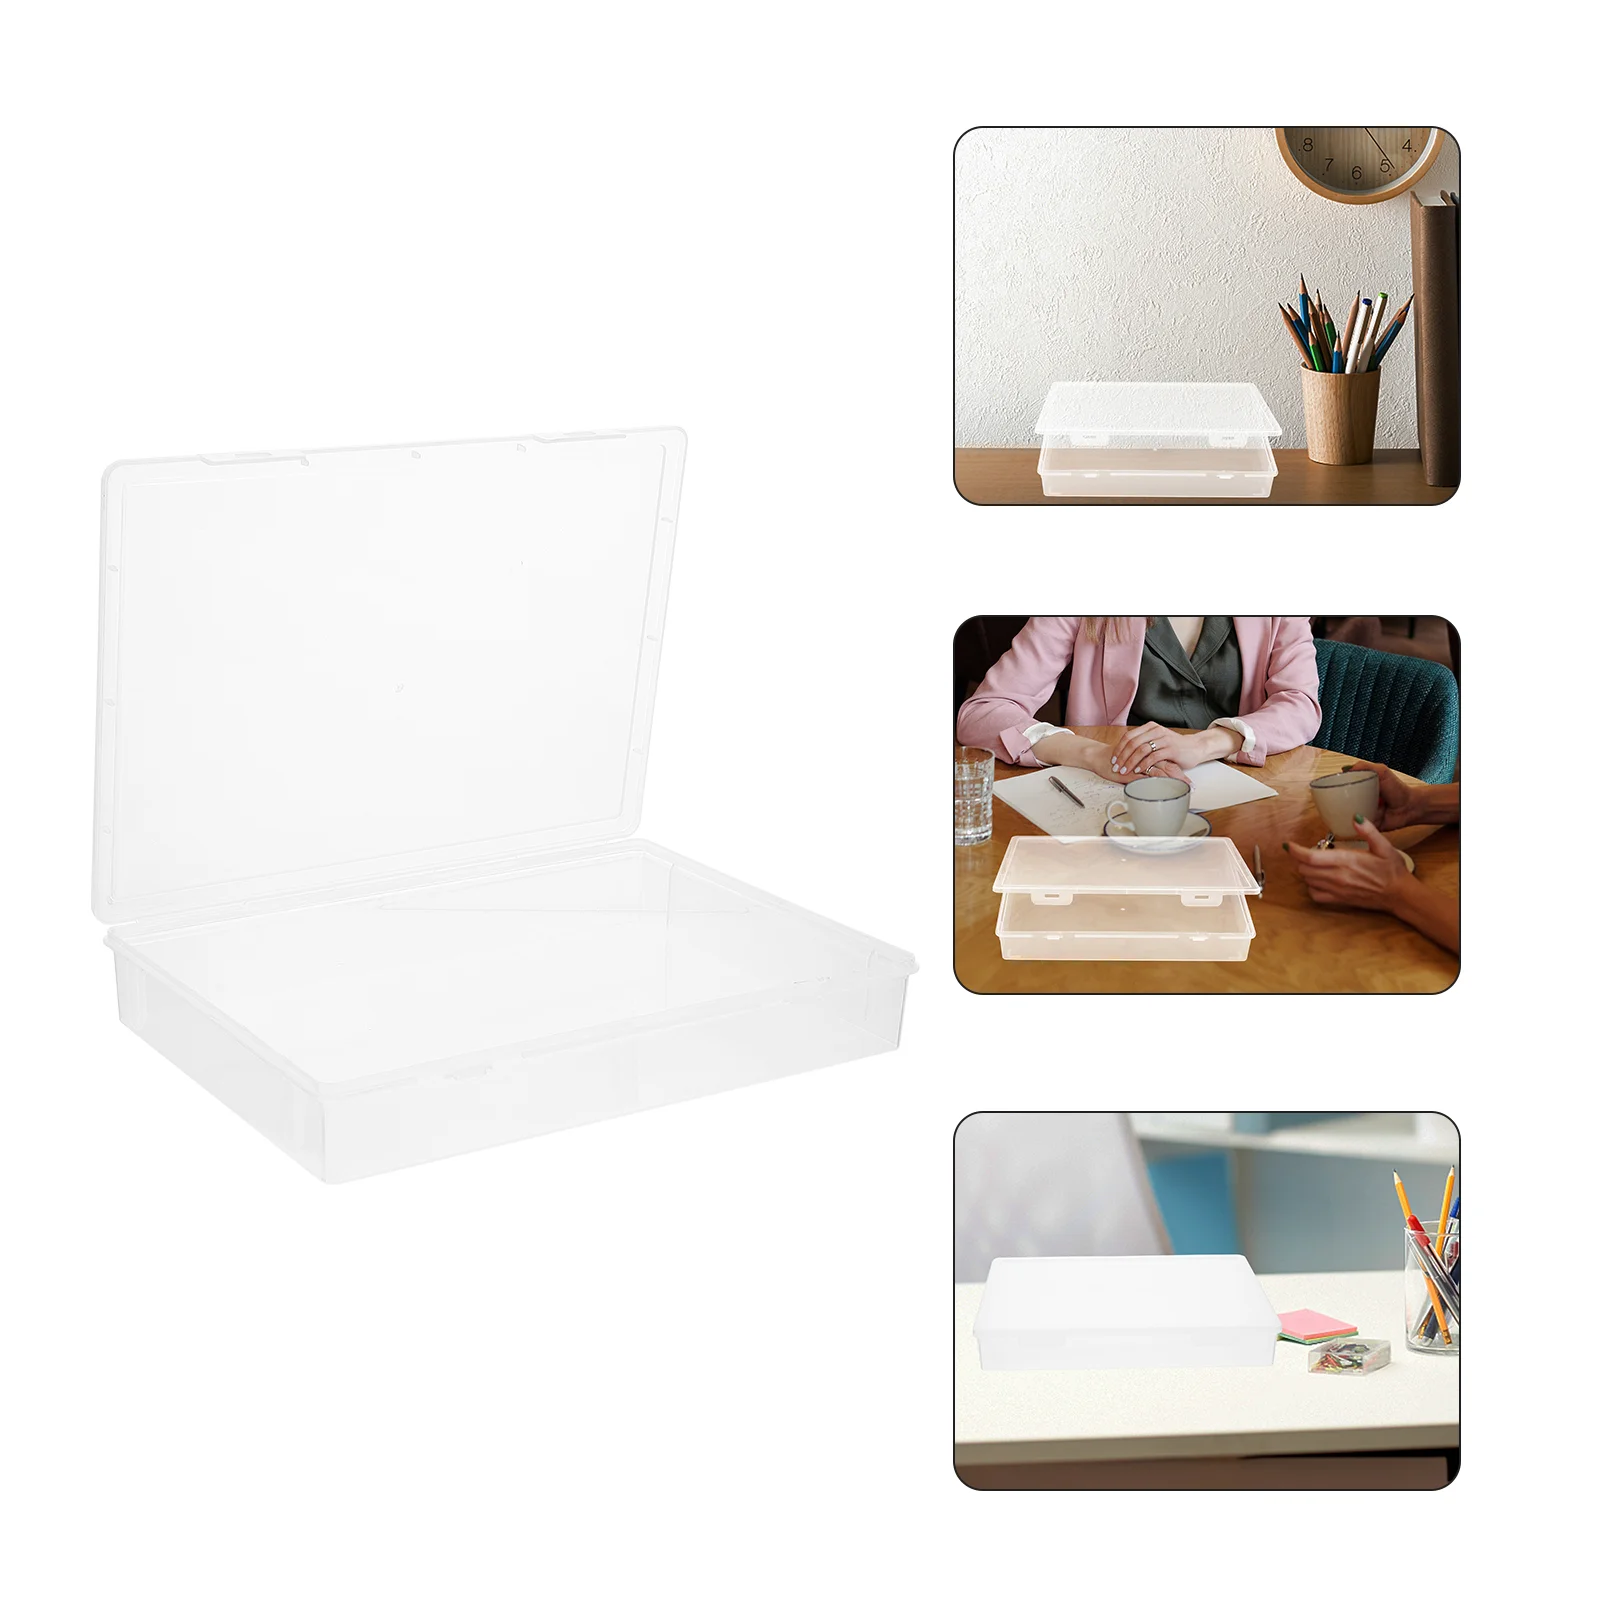 

Tofficu Sheet Protector Portable Project Case A4 File Document Storage Organizer